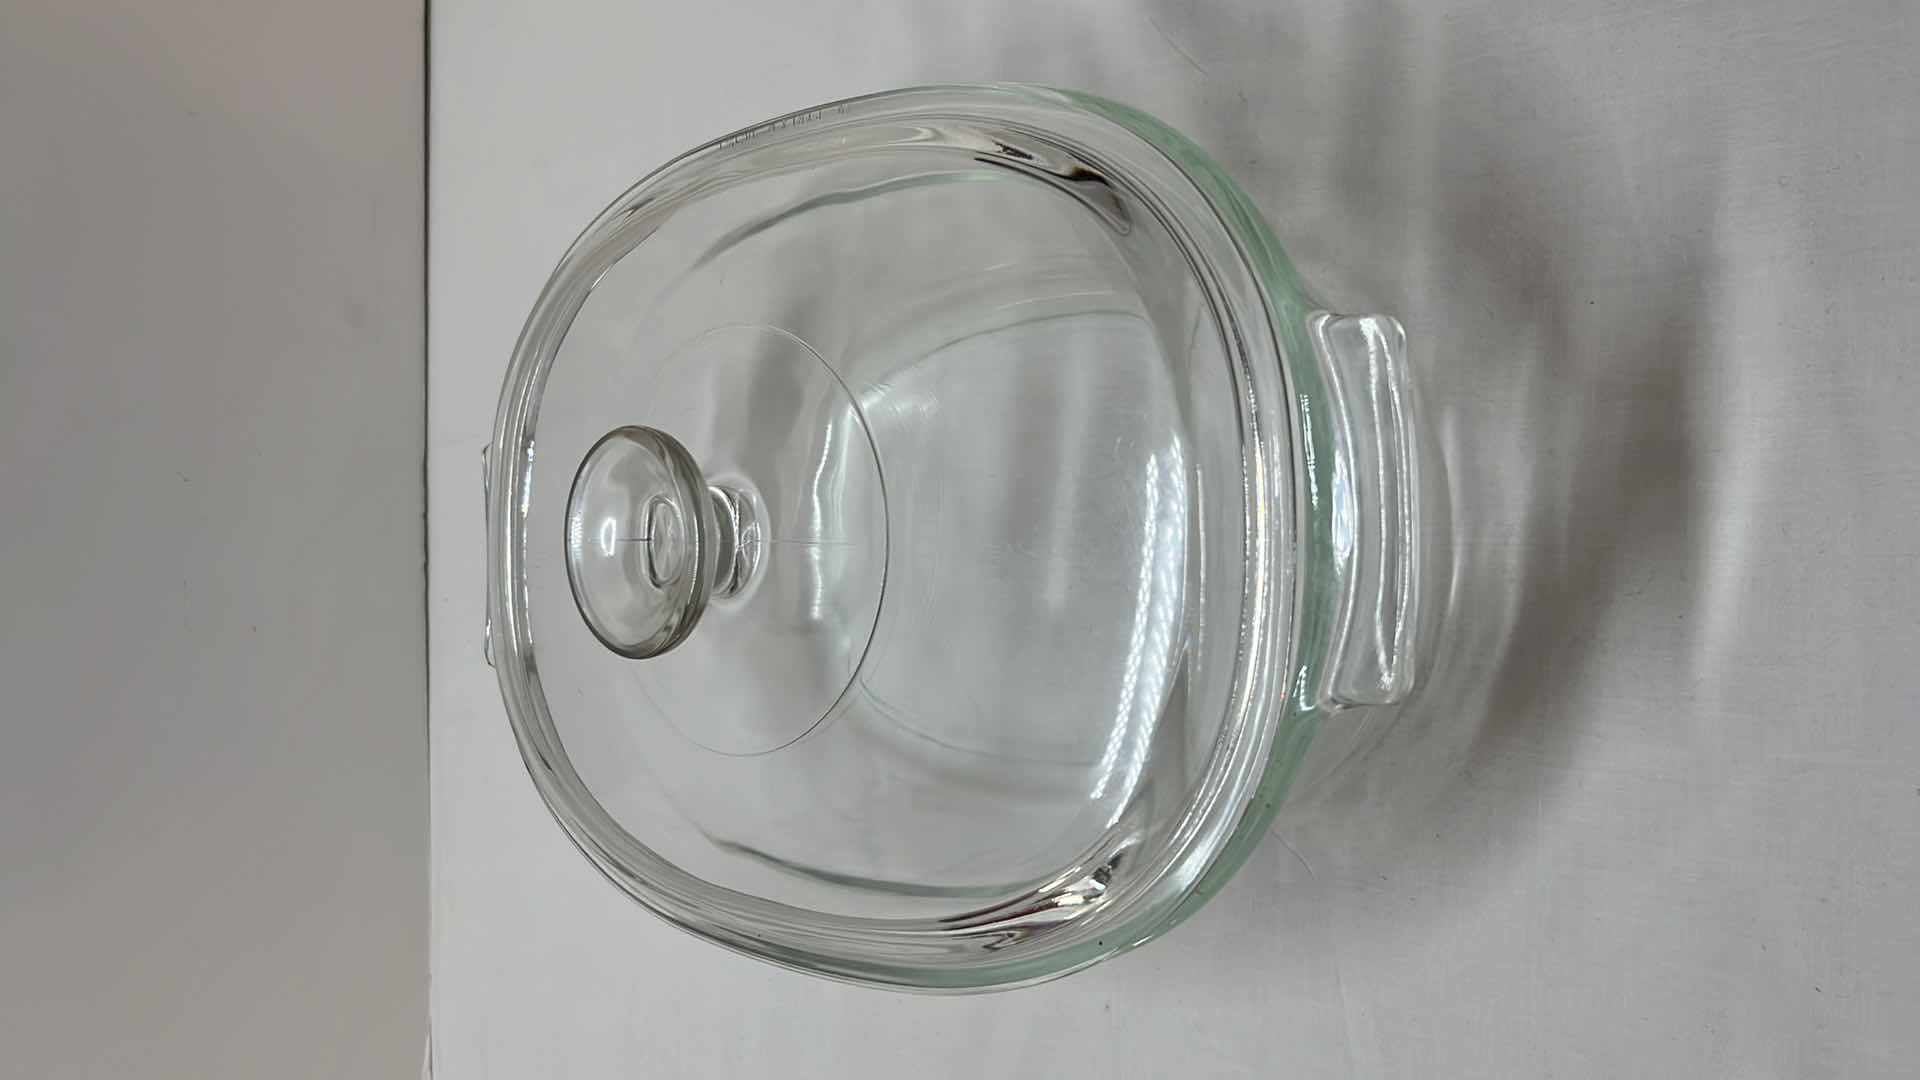 Photo 4 of VINTAGE PYREX GLASS CLEAR CORNING WARE/OVAL ROASTER W LID & ANCHOR OVENWARE GLASS 2 QT SQUARE BAKING DISH